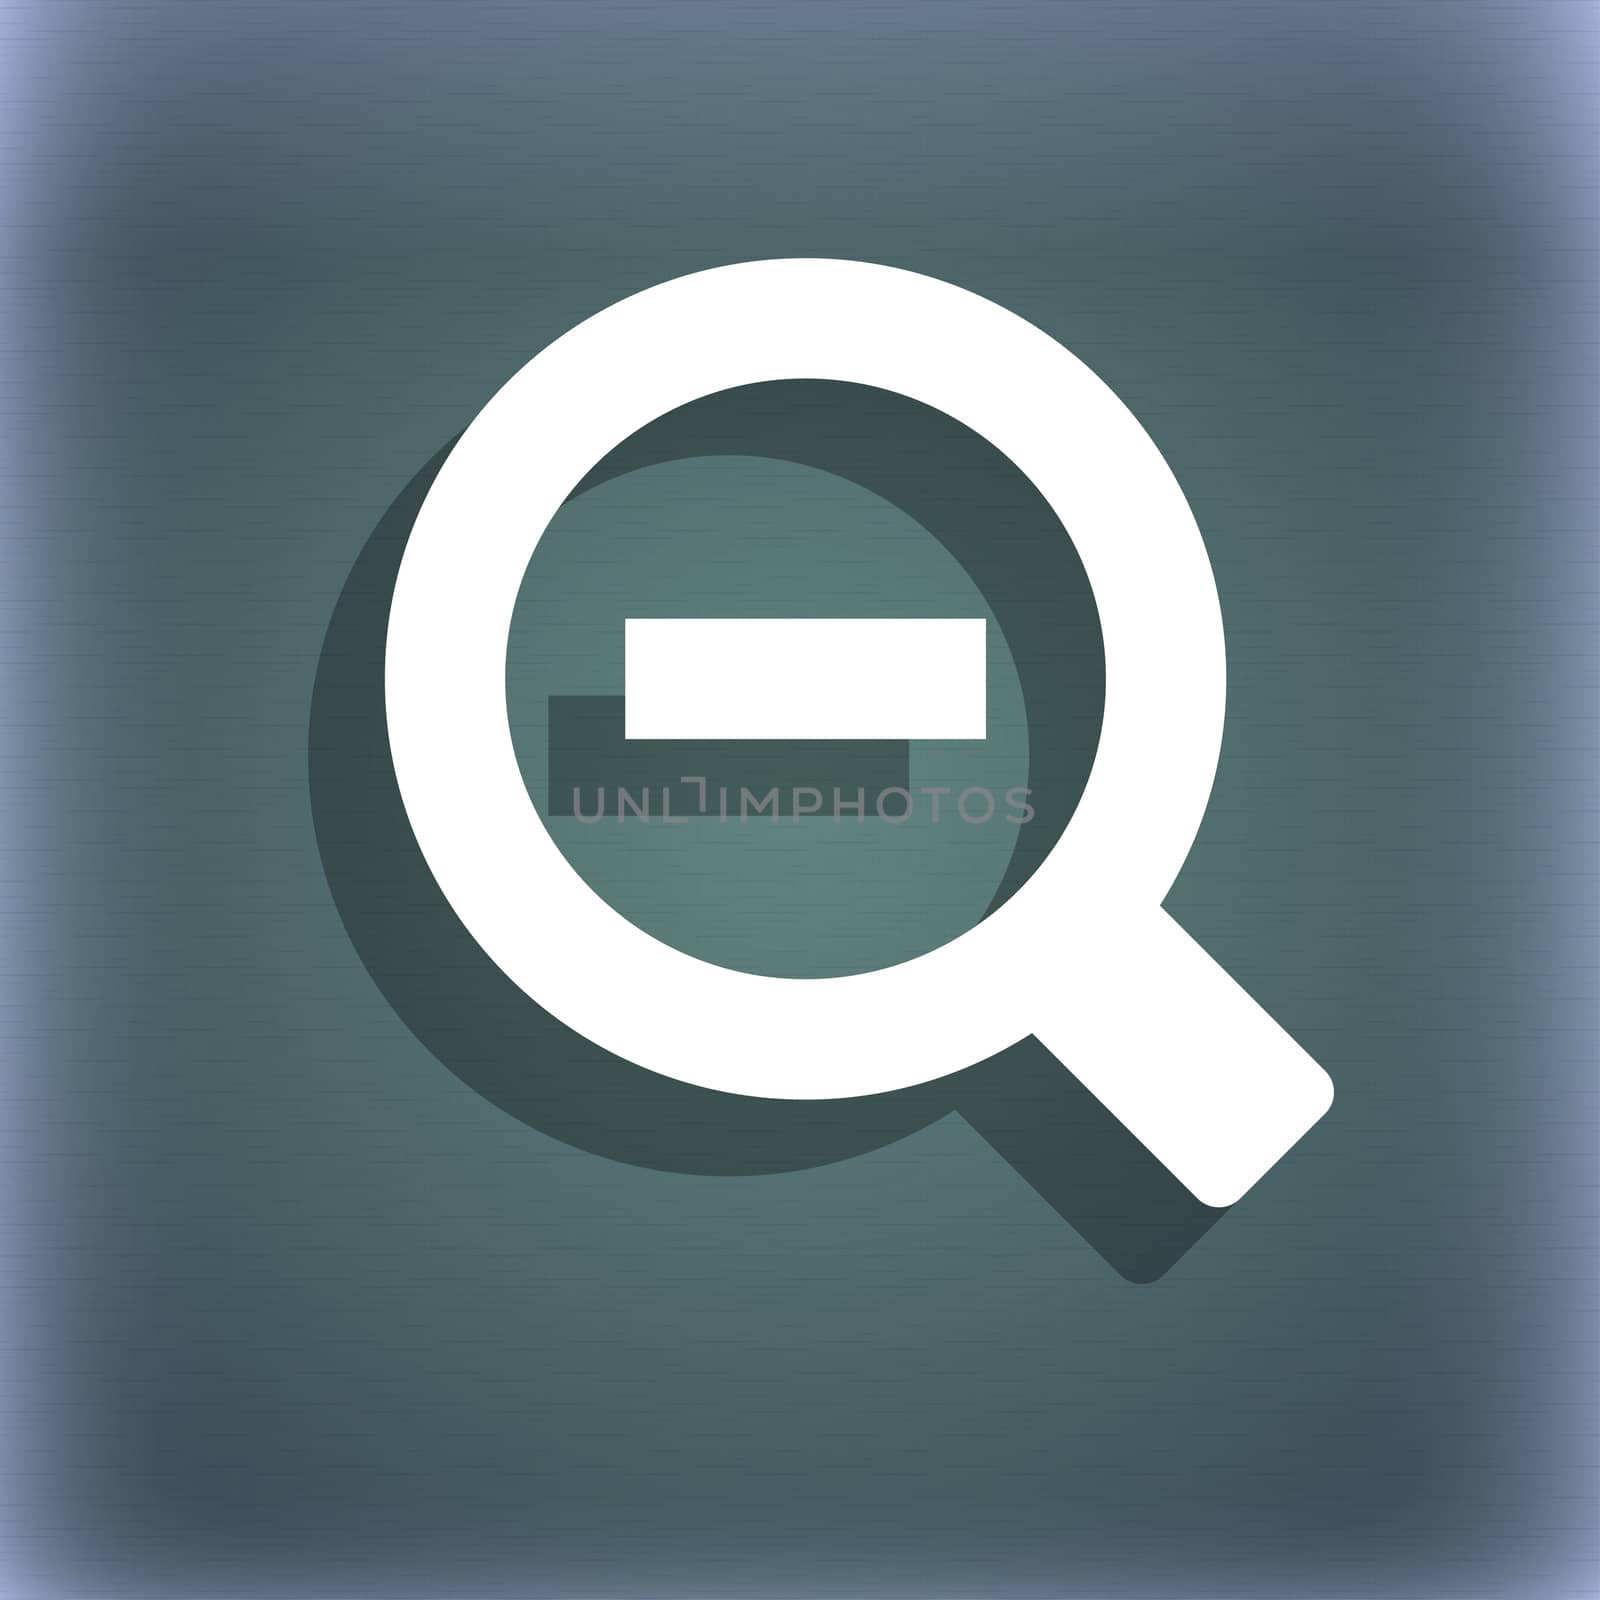 Magnifier glass, Zoom tool icon symbol on the blue-green abstract background with shadow and space for your text. illustration